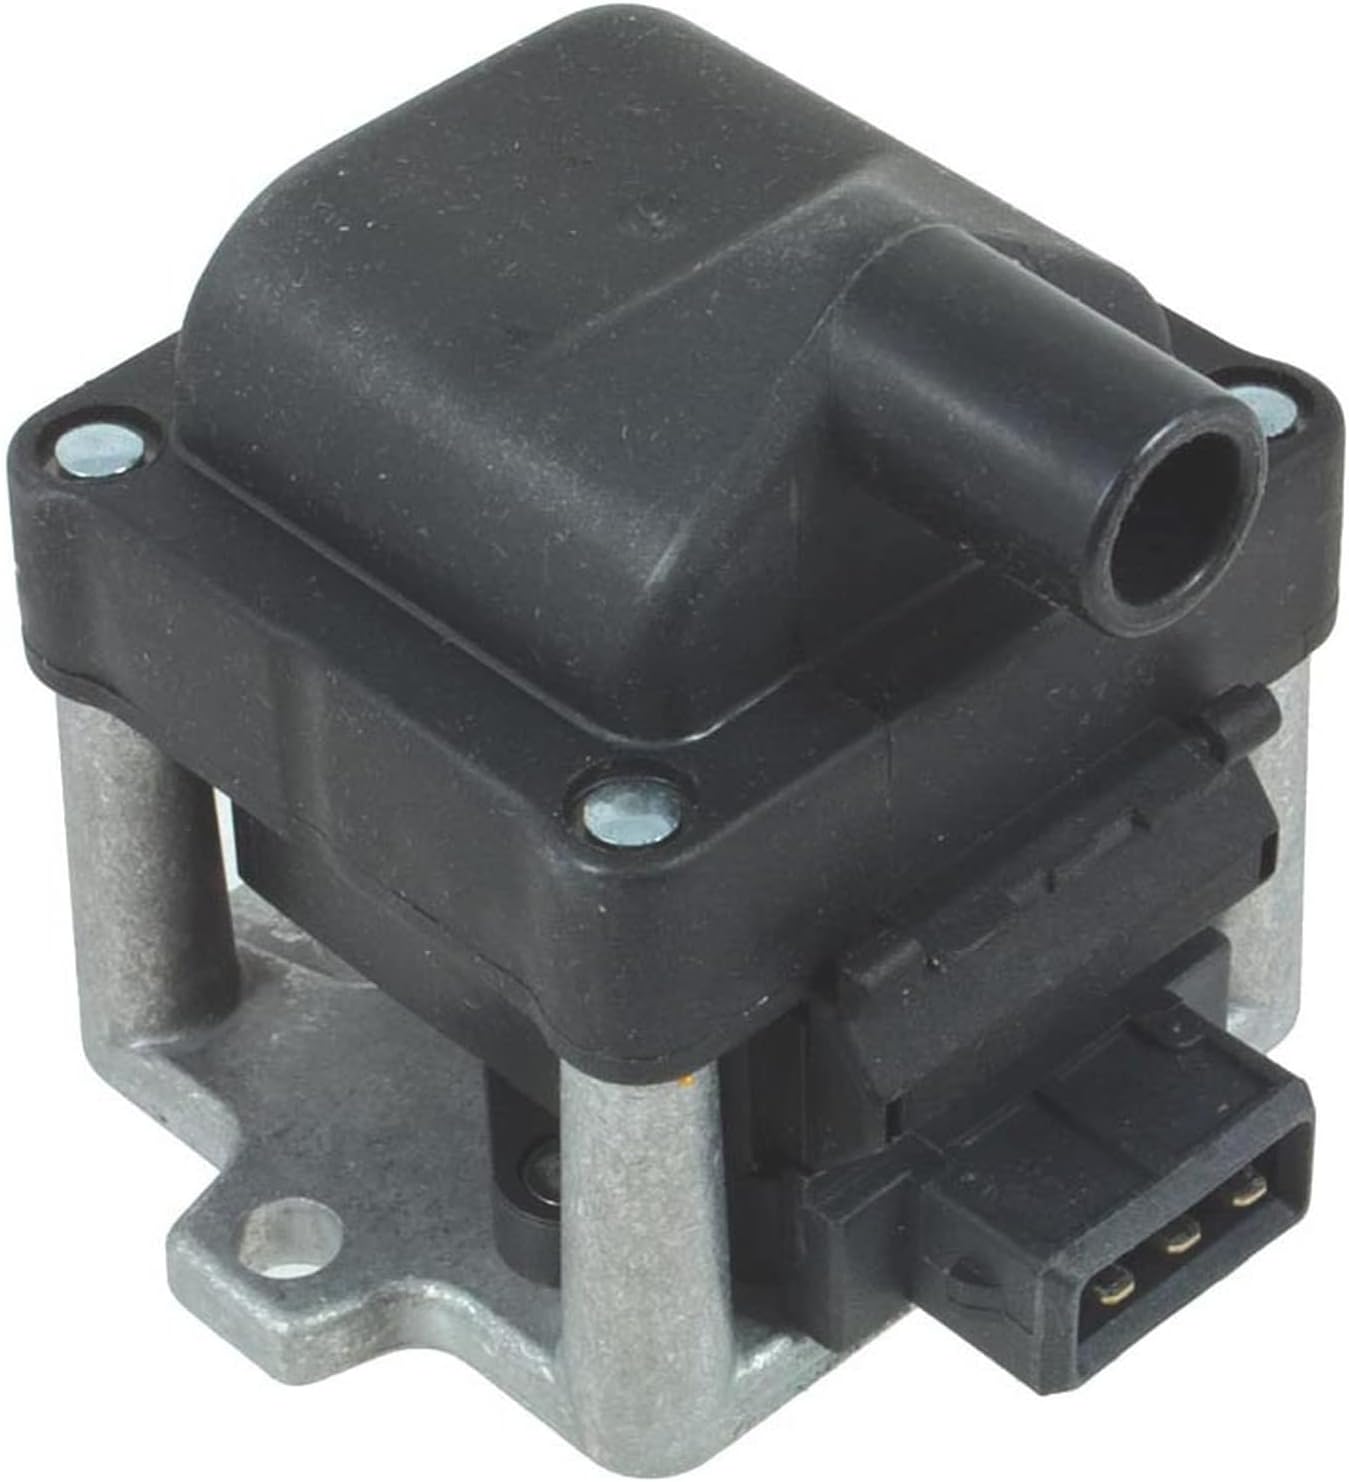 Ignition coil pack replacement